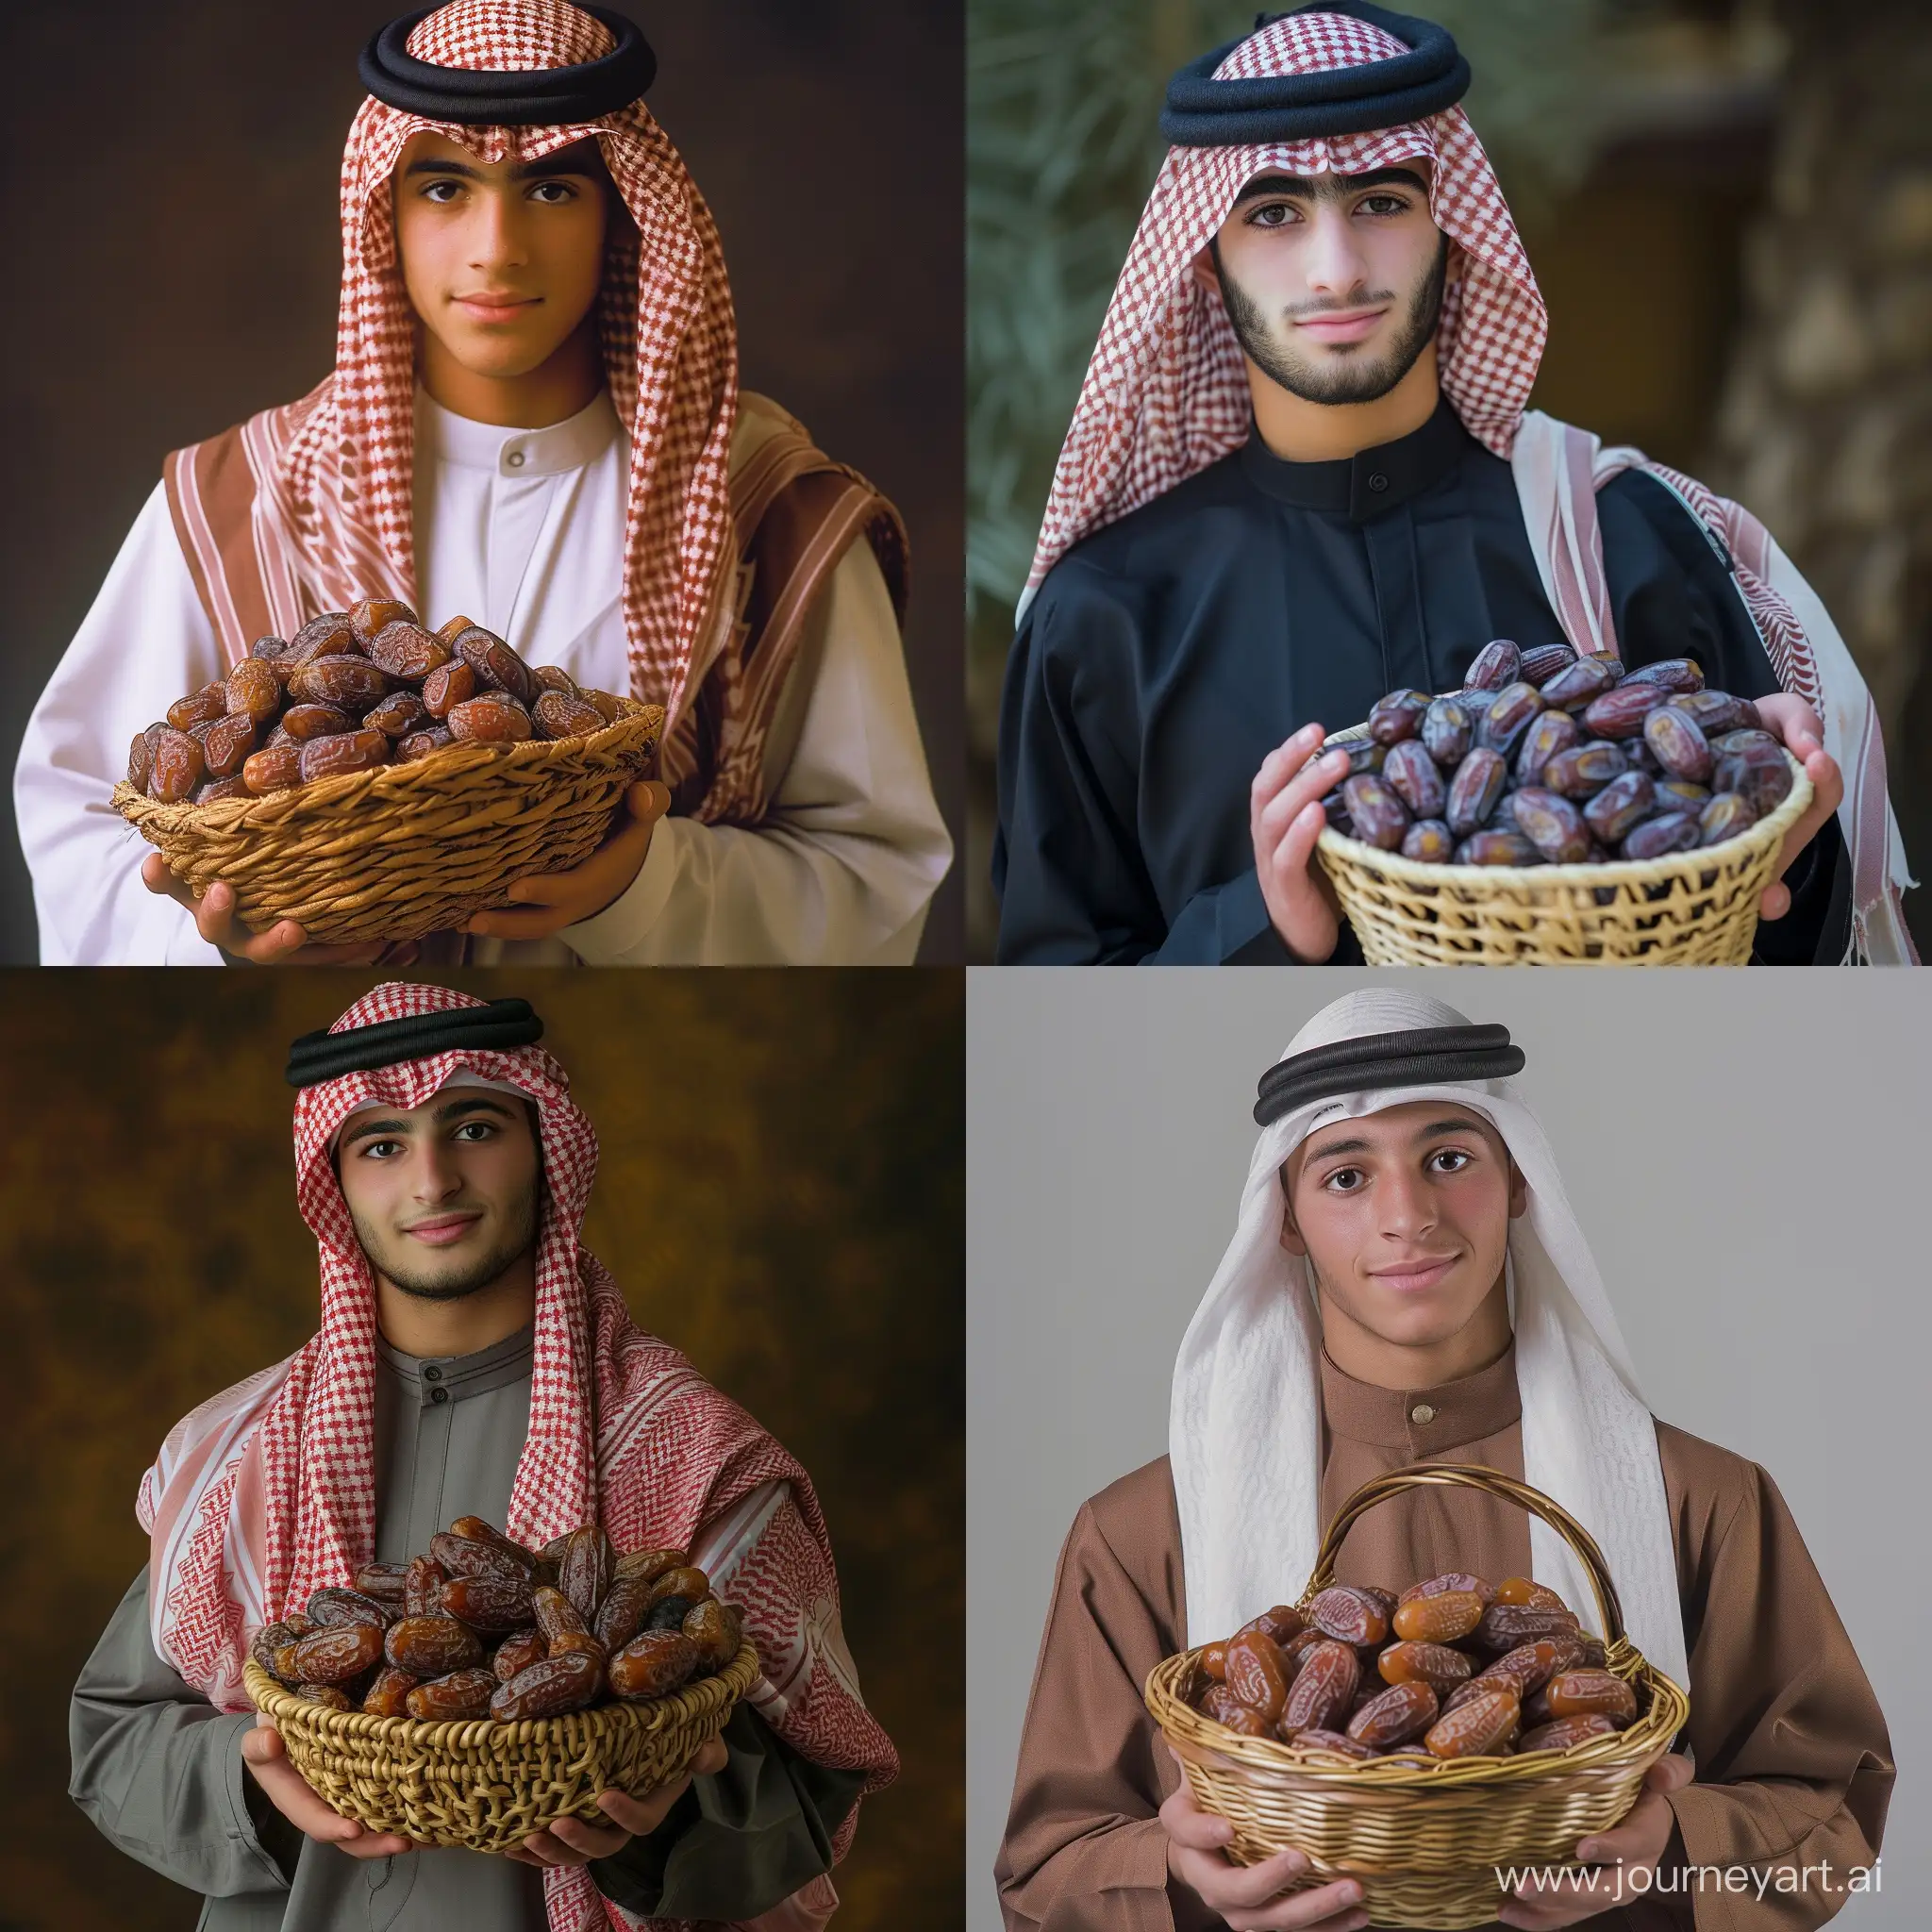 Real and natural photo of a young man in Arabic dress holding a basket of dates. Full detail of date basket and young man's face. The date basket should be in the middle of the picture.